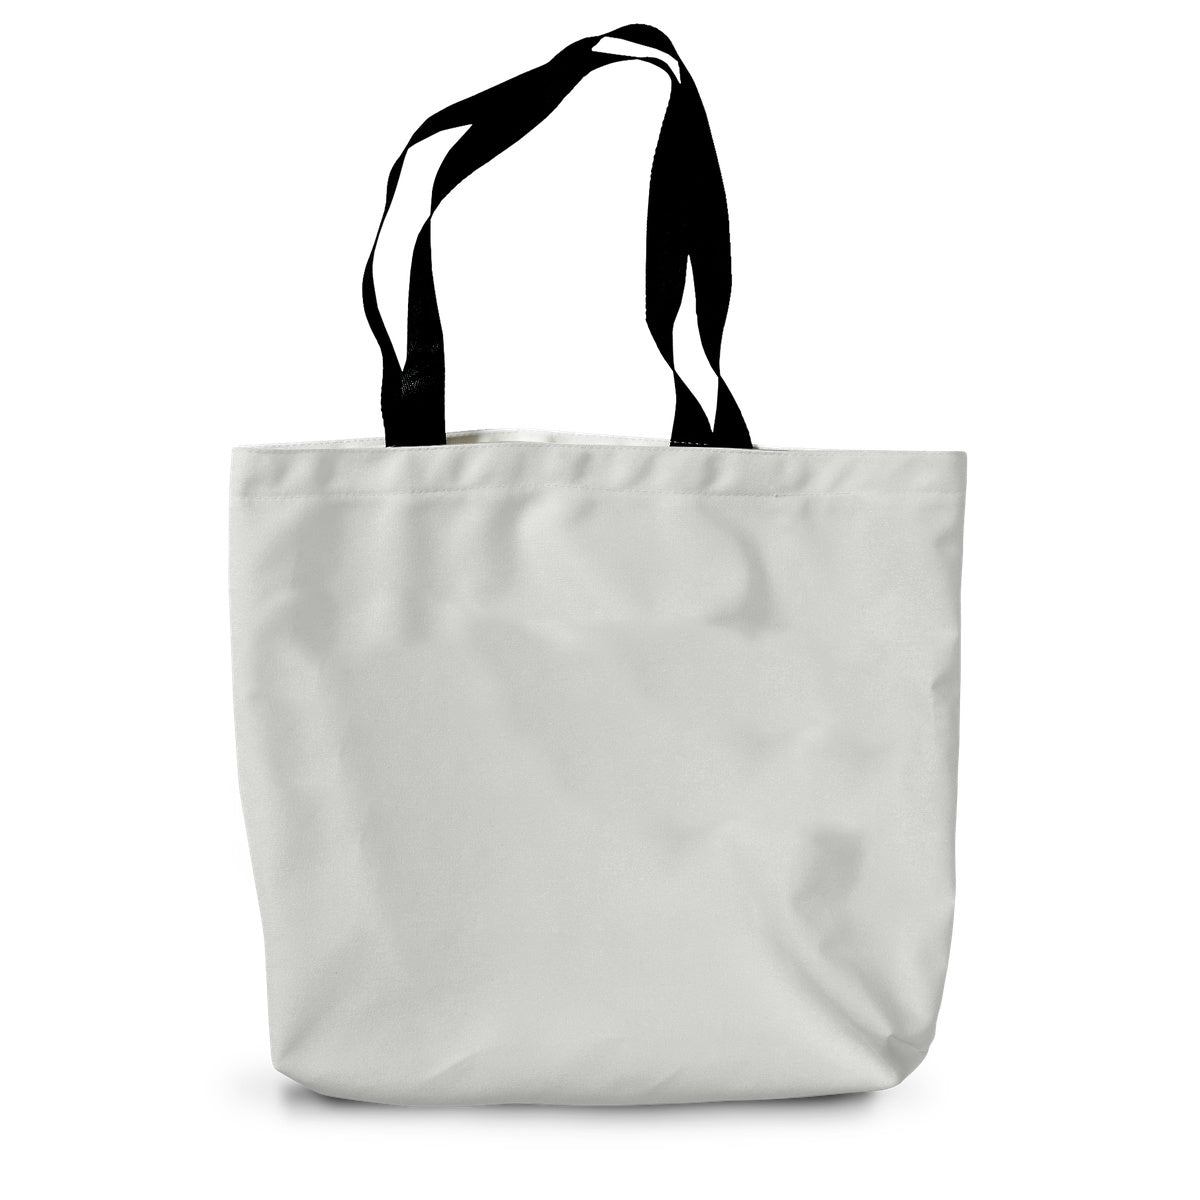 Wow Bus Canvas Tote Bag